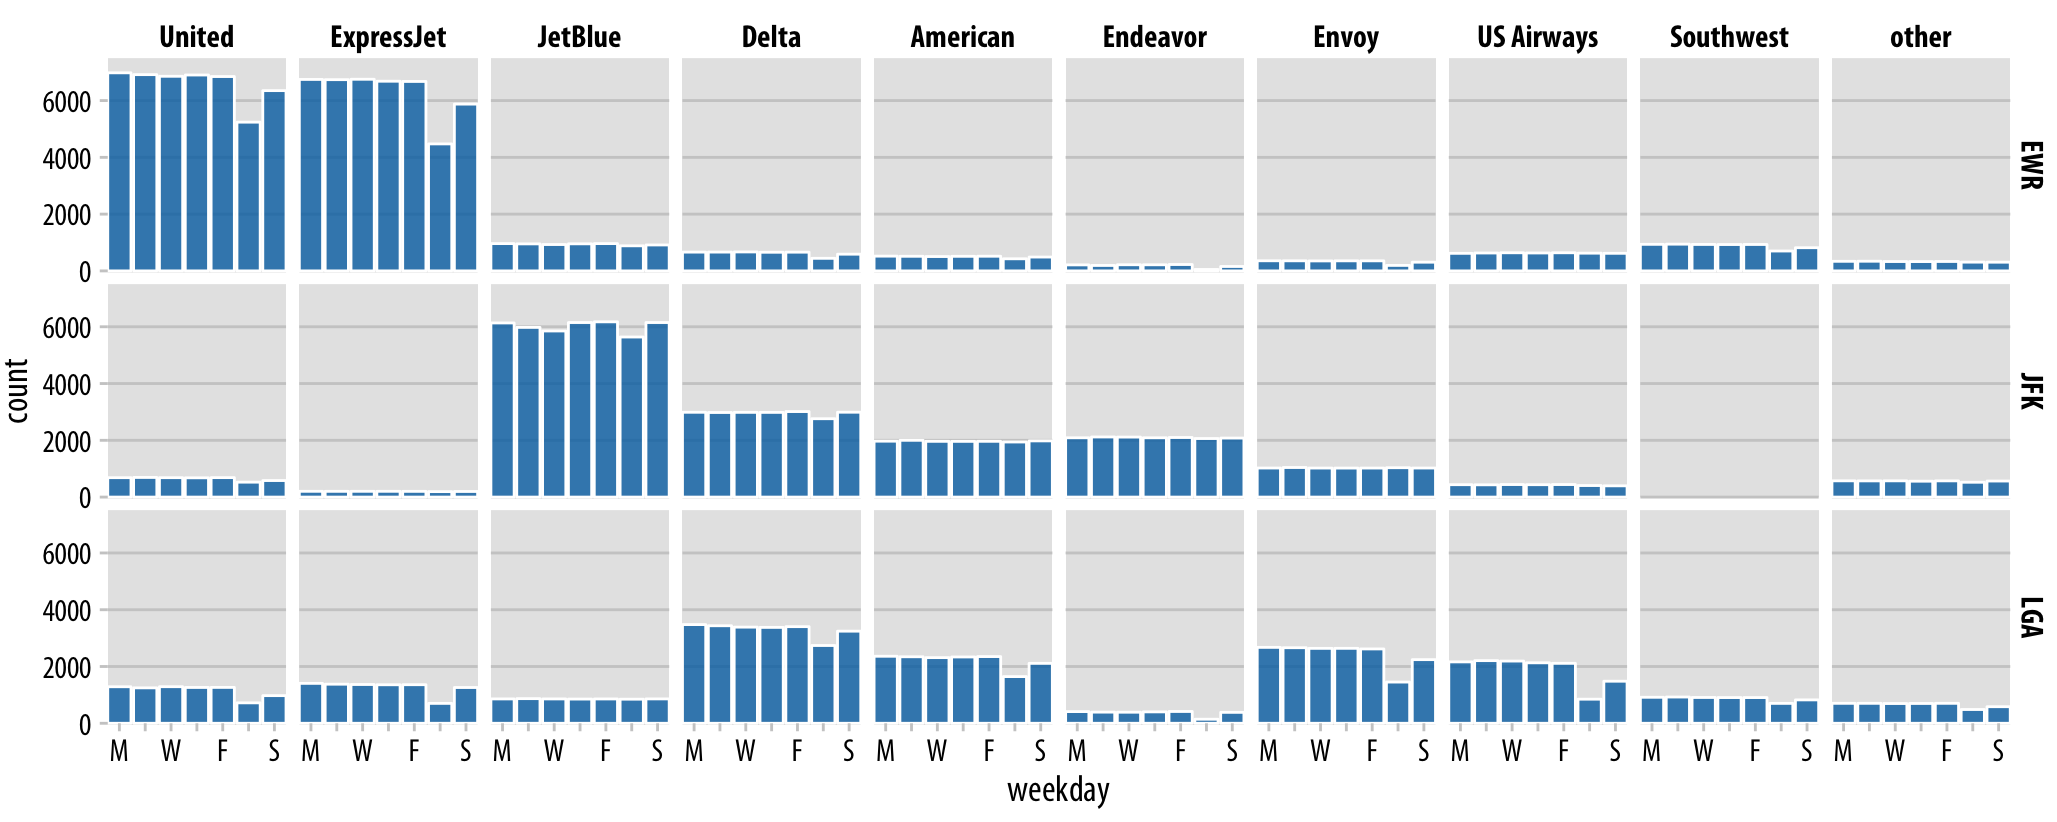 Departures out of airports in the New York city area in 2013, broken down by airline, airport, and weekday. United Airlines and ExpressJet make up most of the departures out of Newark Airport (EWR), JetBlue, Delta, American, and Endeavor make up most of the departures out of JFK, and Delta, American, Envoy, and US Airways make up most of the departures out of LaGuardia (LGA). Most but not all airlines have fewer departures on weekends than during the work week. Data source: U.S. Dept. of Transportation, Bureau of Transportation Statistics.